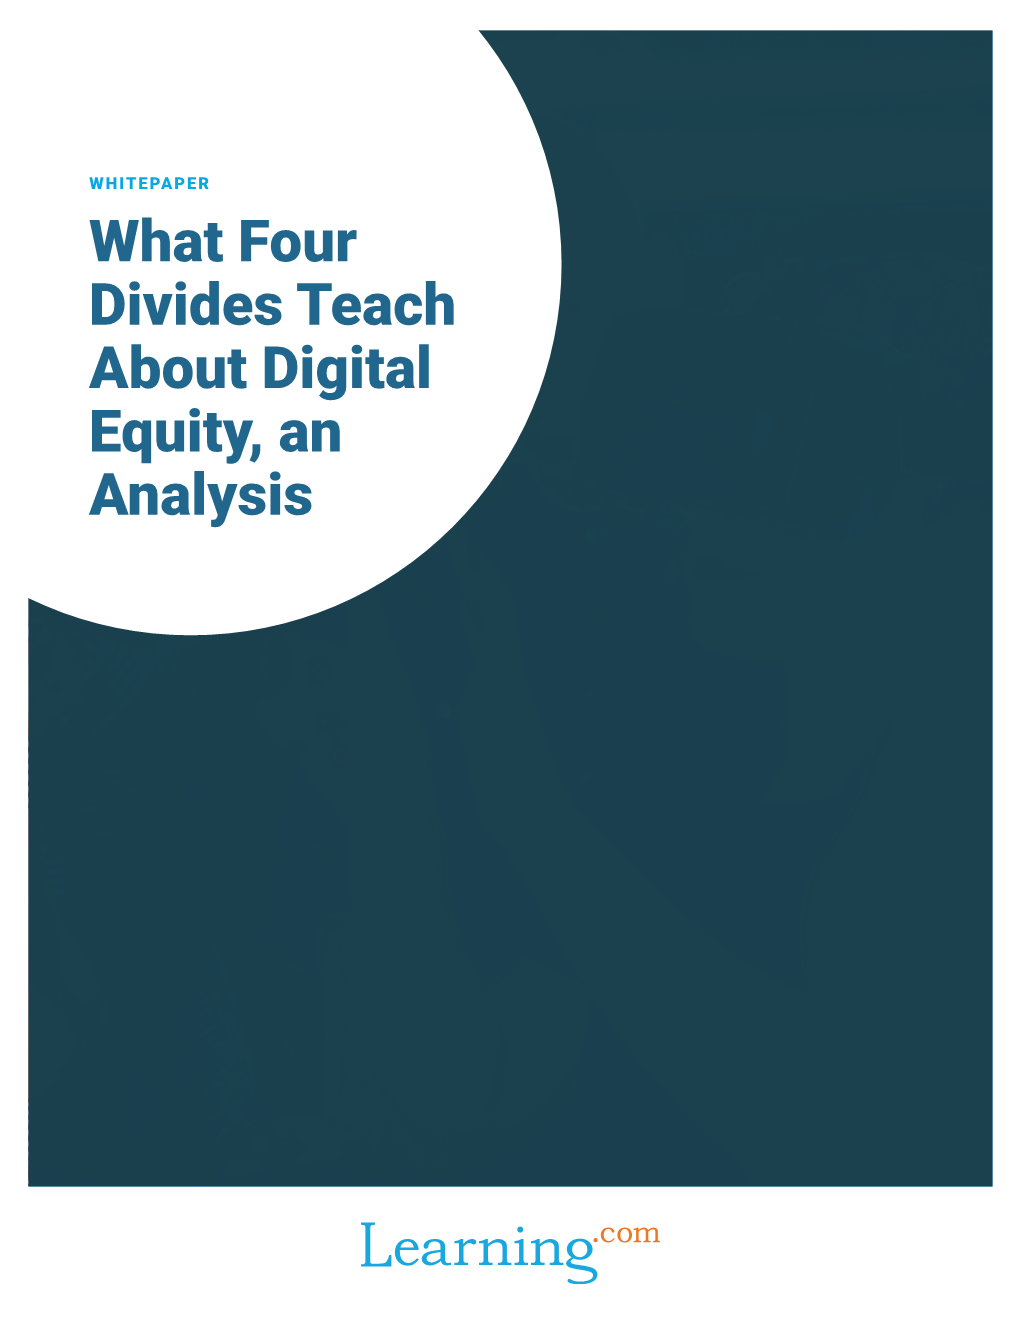 What Four Divides Teach About Digital Equity, an Analysis TABLE of CONTENTS